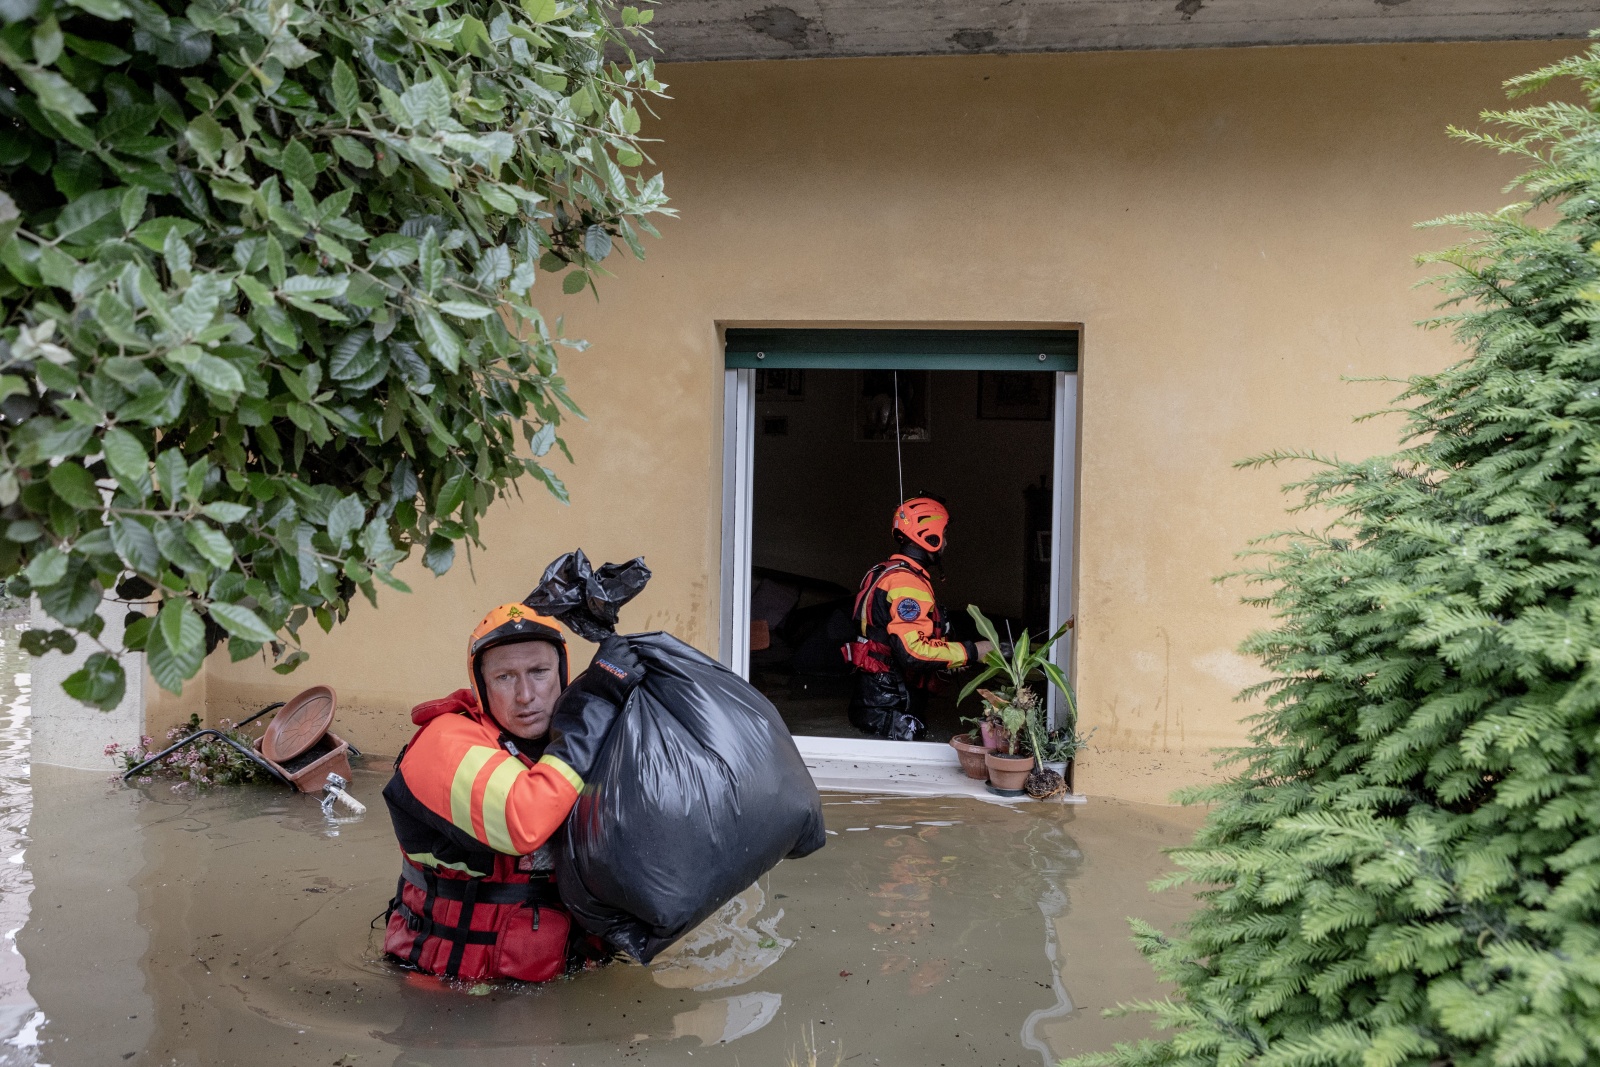 FORNACE ZARATTINI, ITALY  MAY 20:
Firefighters rescue people and recover their belongings in houses submerged in water. The flood and the overflow of rivers, in fact, has invaded entire neighborhoods and in some points exceeds one meter of depth in Fornace Zarattini, Emilia-Romagna, on May 20, 2023.